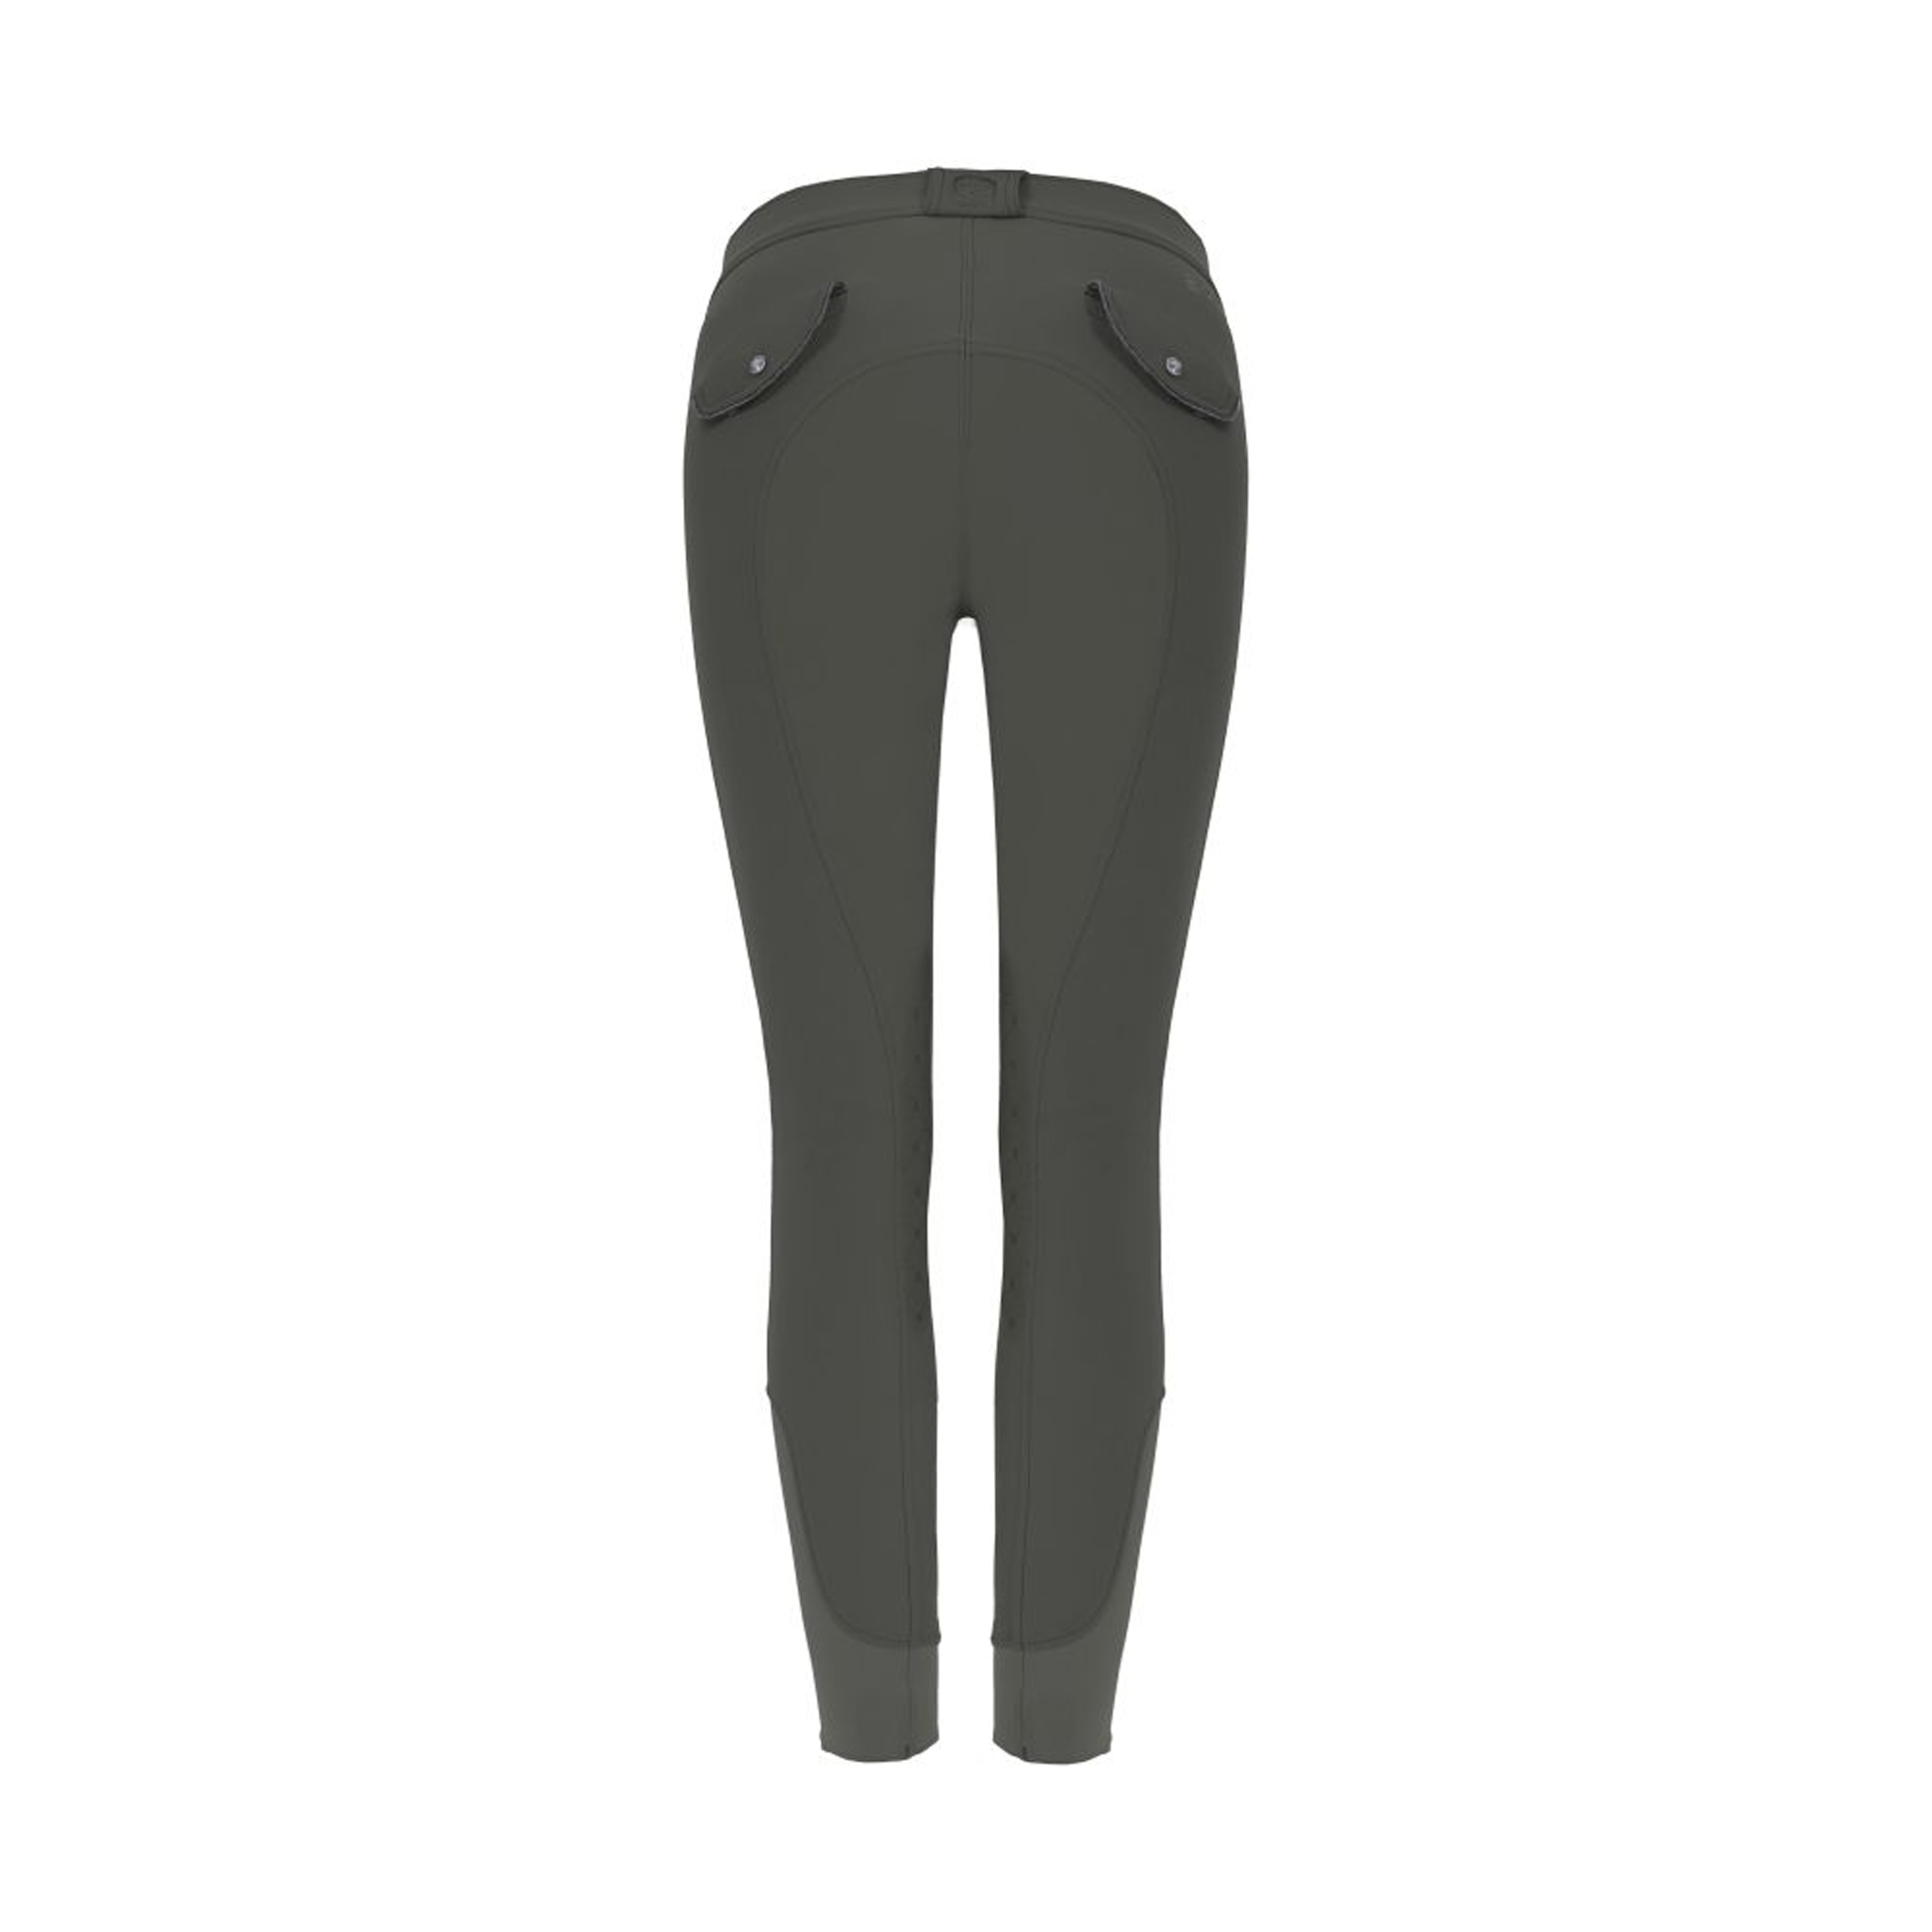 Cavallo DAY GRIP Knee Grip, Mid Rise Breeches, Olive